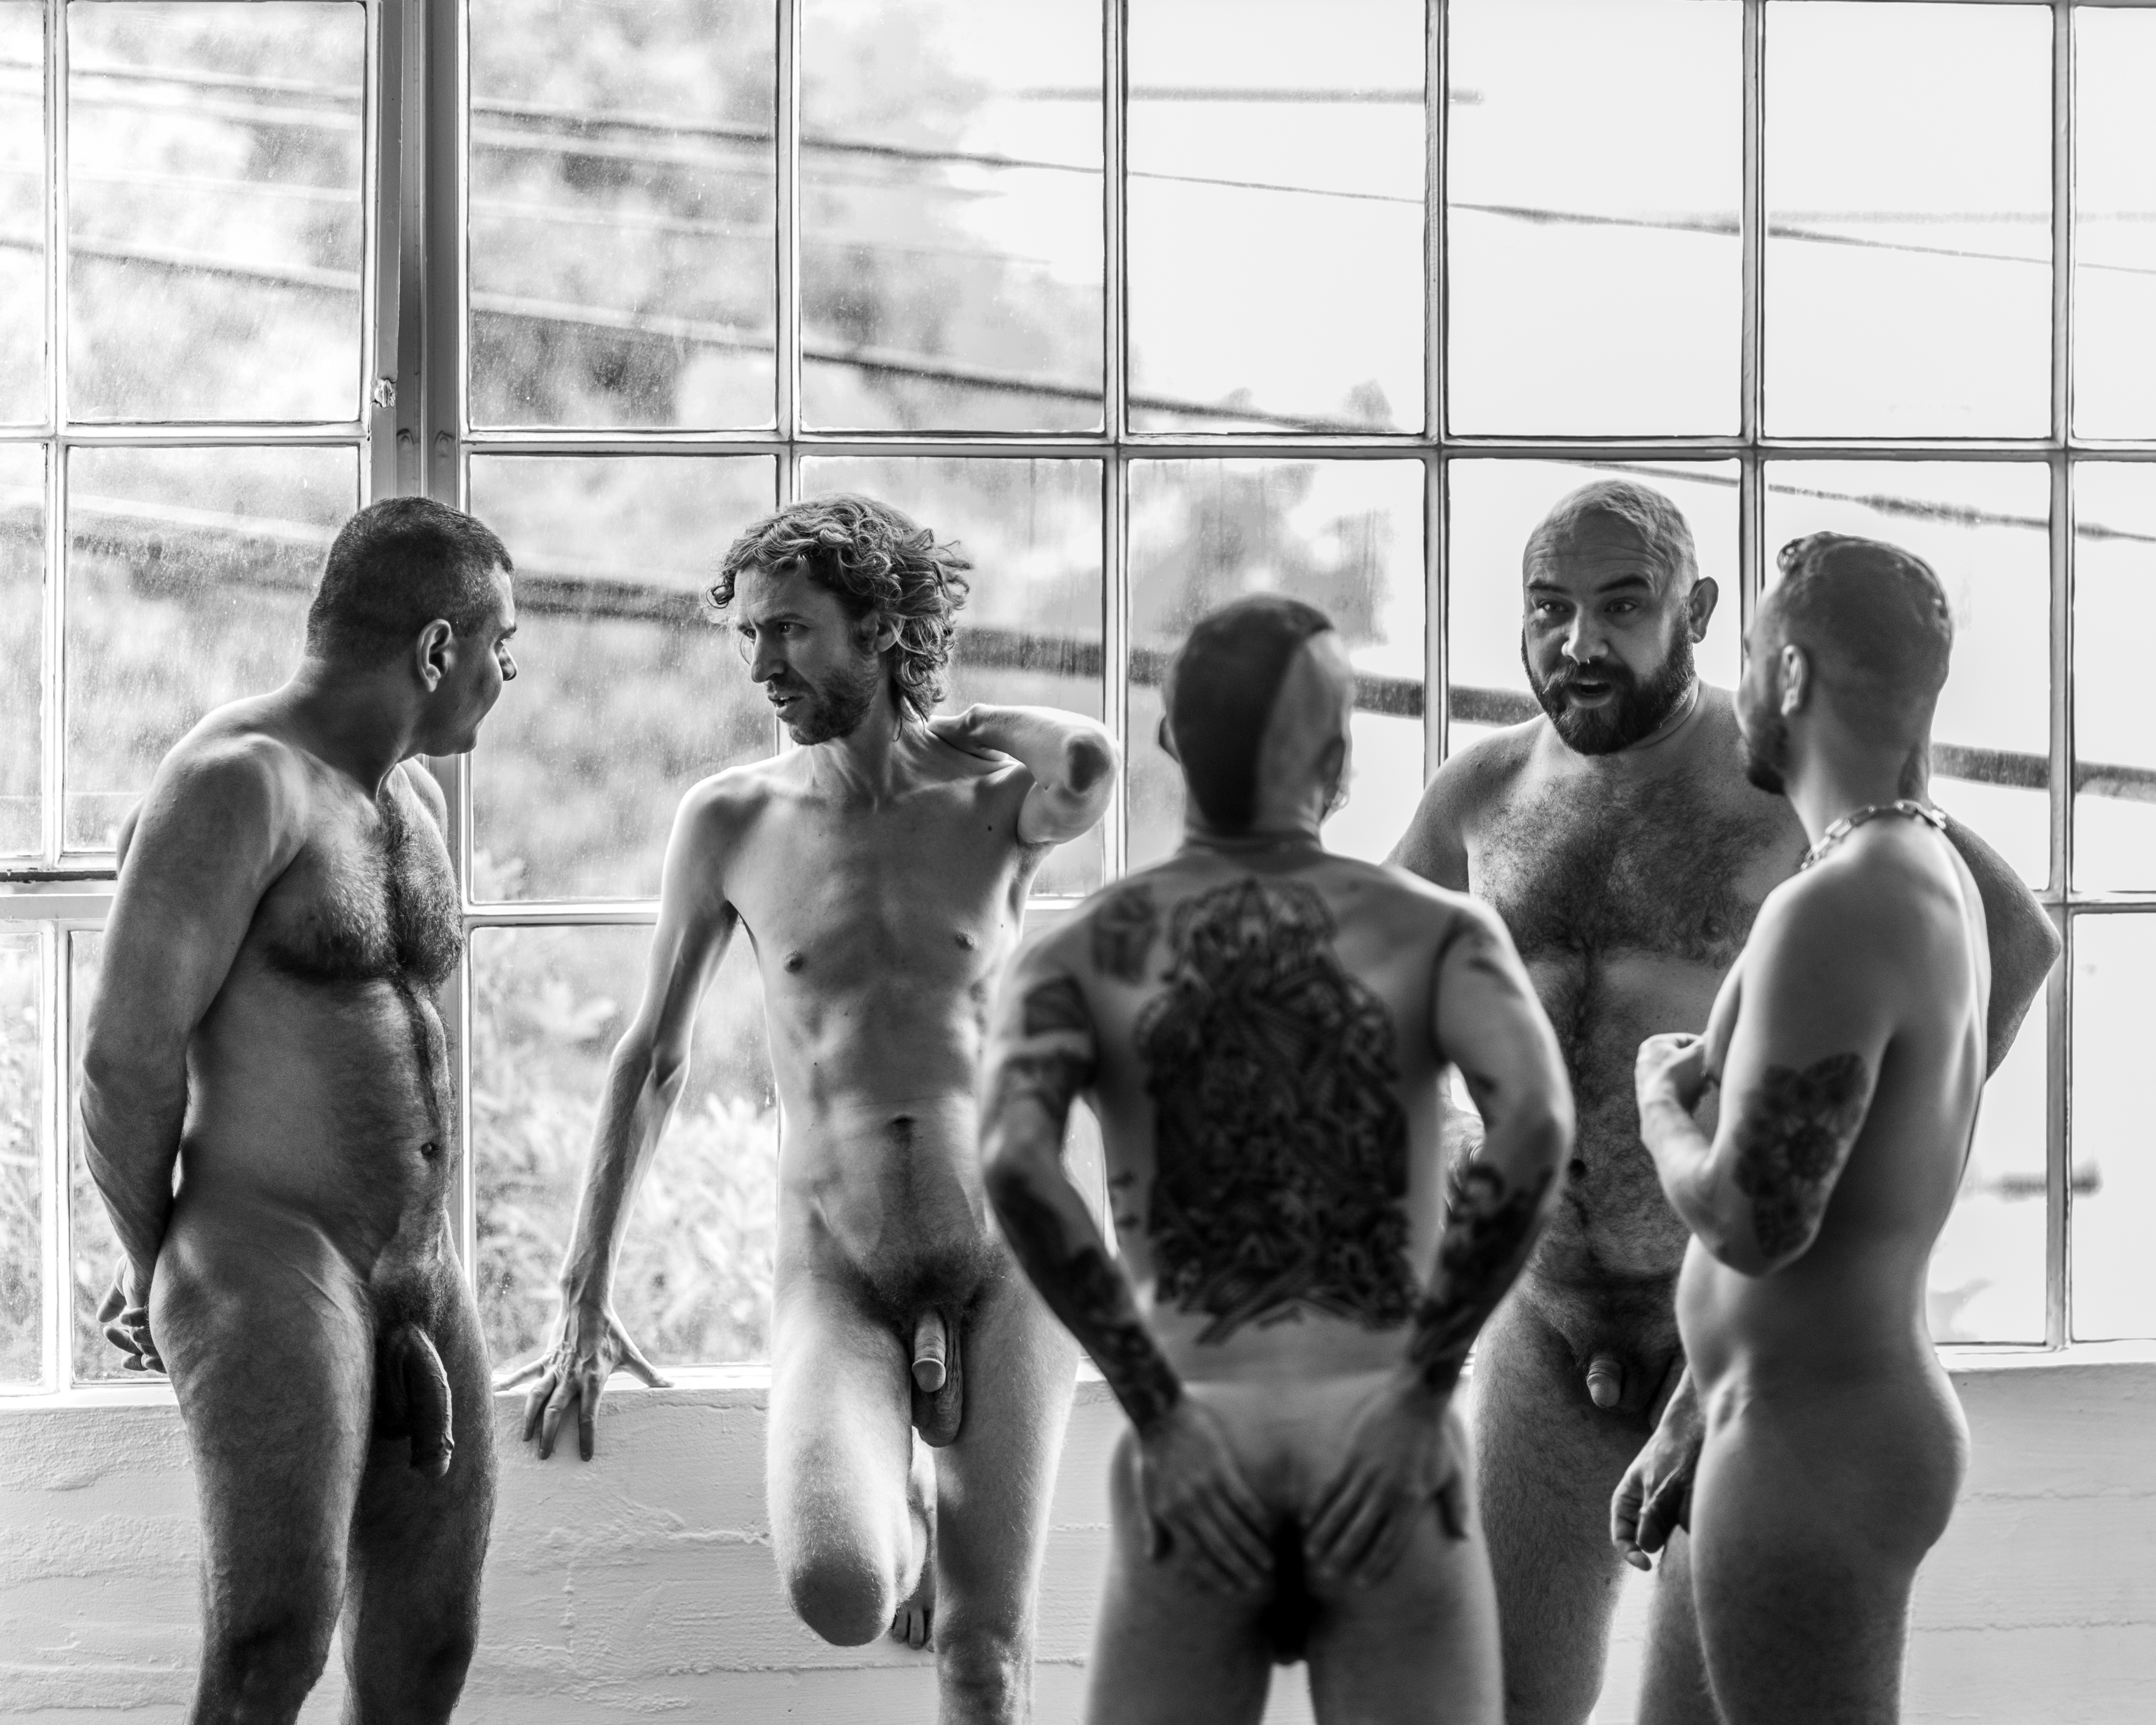 Nude guys hanging out